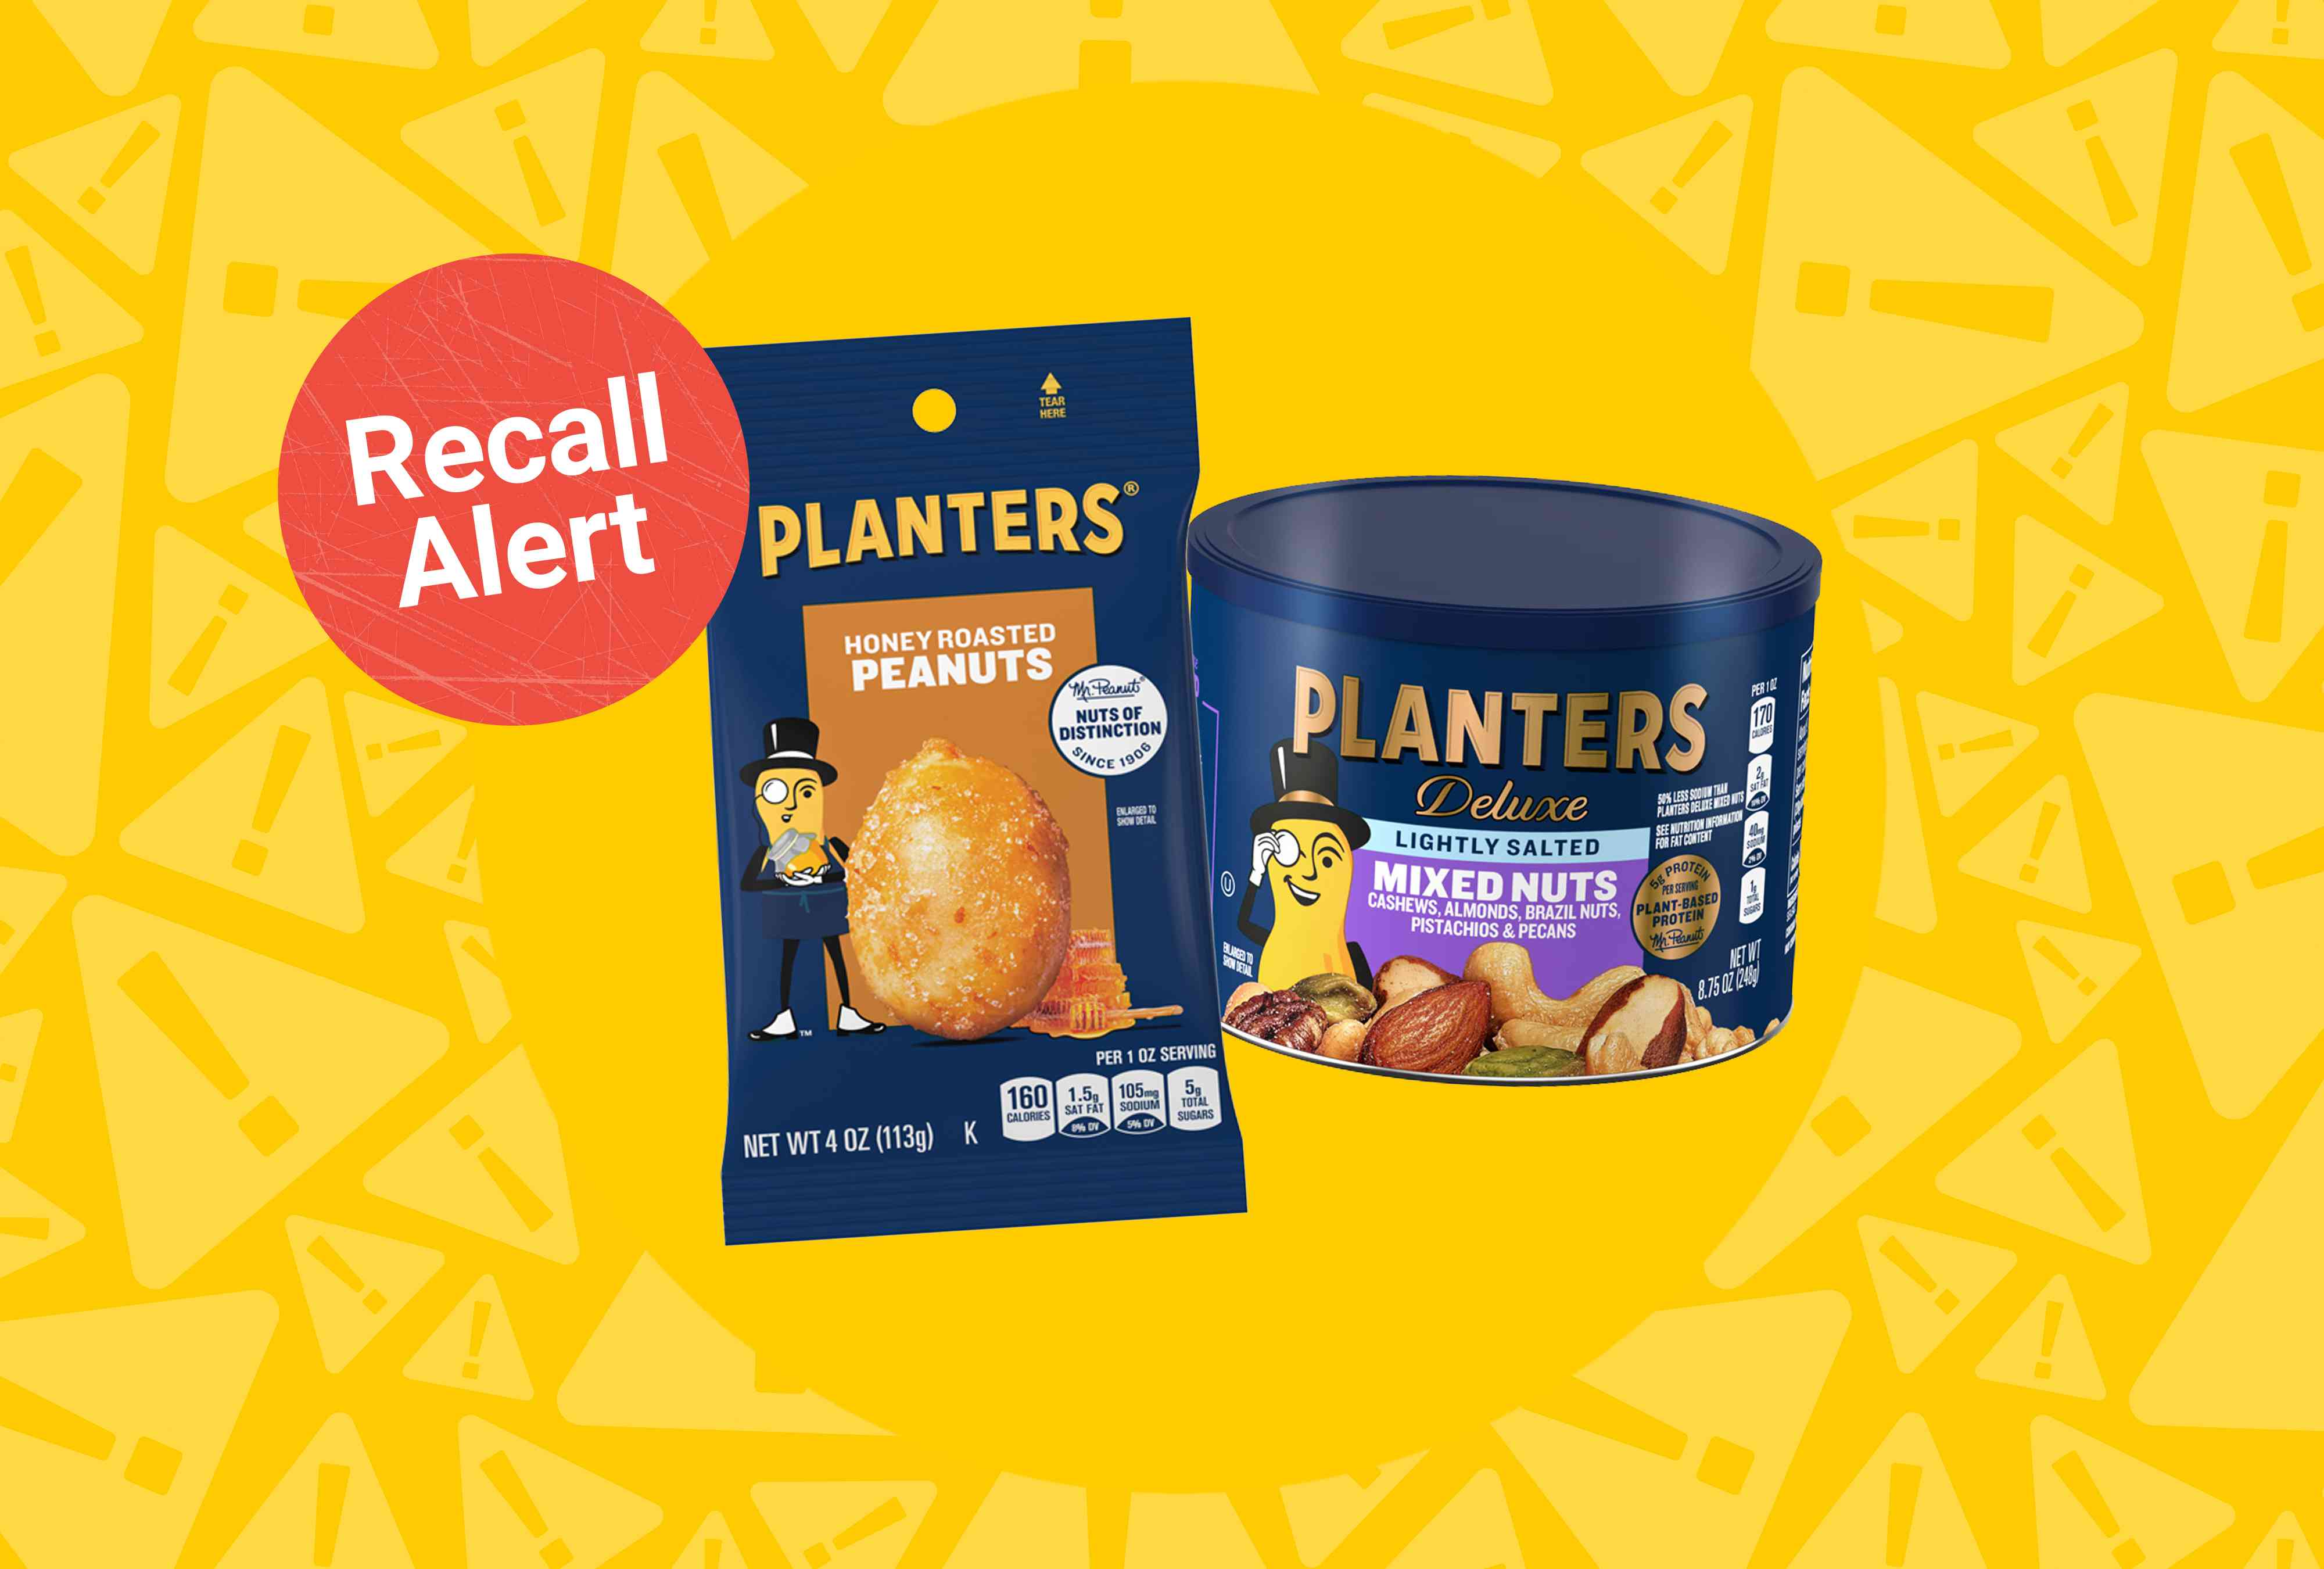 planters just recalled peanuts in 5 states due to potential listeria contamination